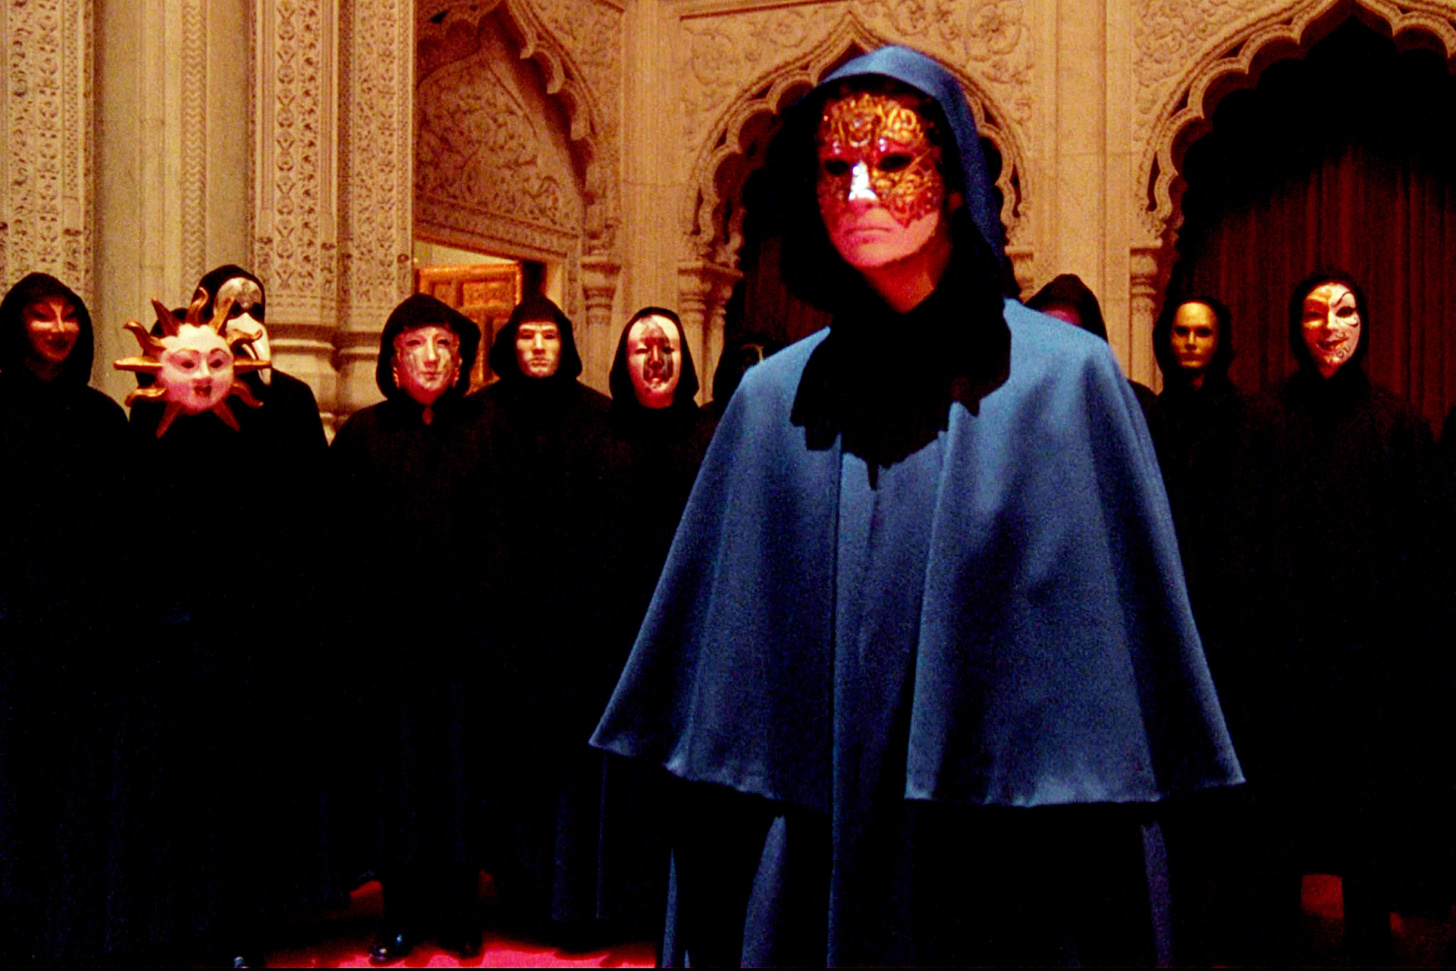 Still from Eyes Wide Shut, people in capes and weird illuminati masks in a baroque-looking room